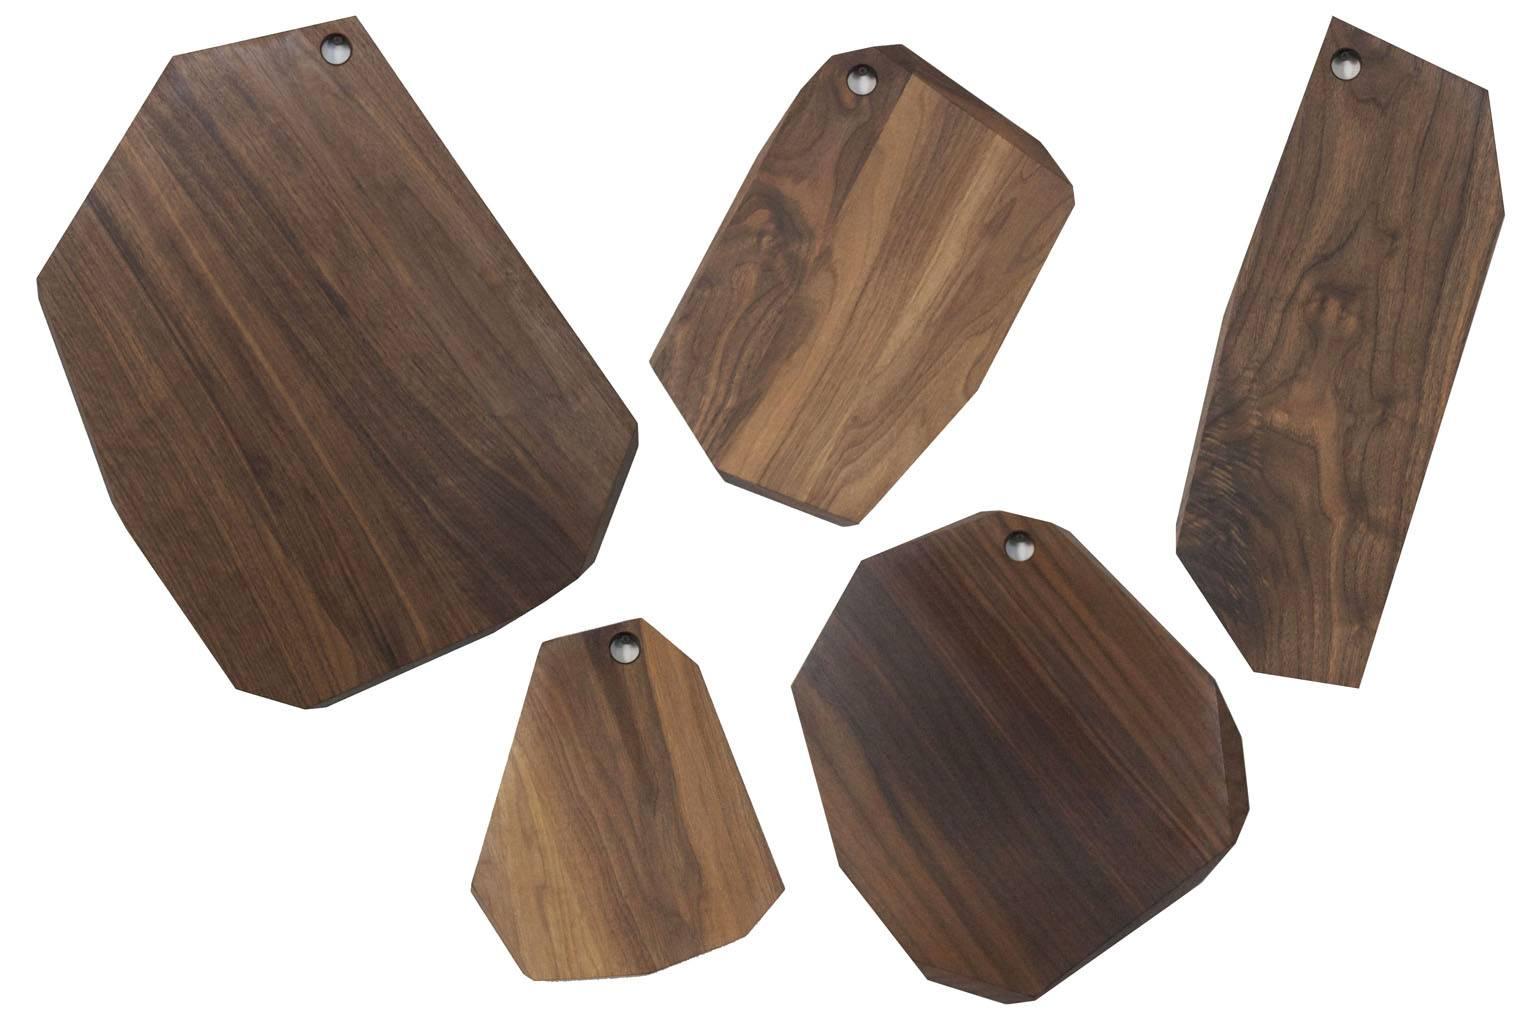 Handcrafted in Brooklyn, Noah Spencer carefully selects wood with beautiful grain patterns to create each Slab Cutting Board. These sculptural and functional objects are great for simple kitchen cutting and artful food presentation. 

Materials: